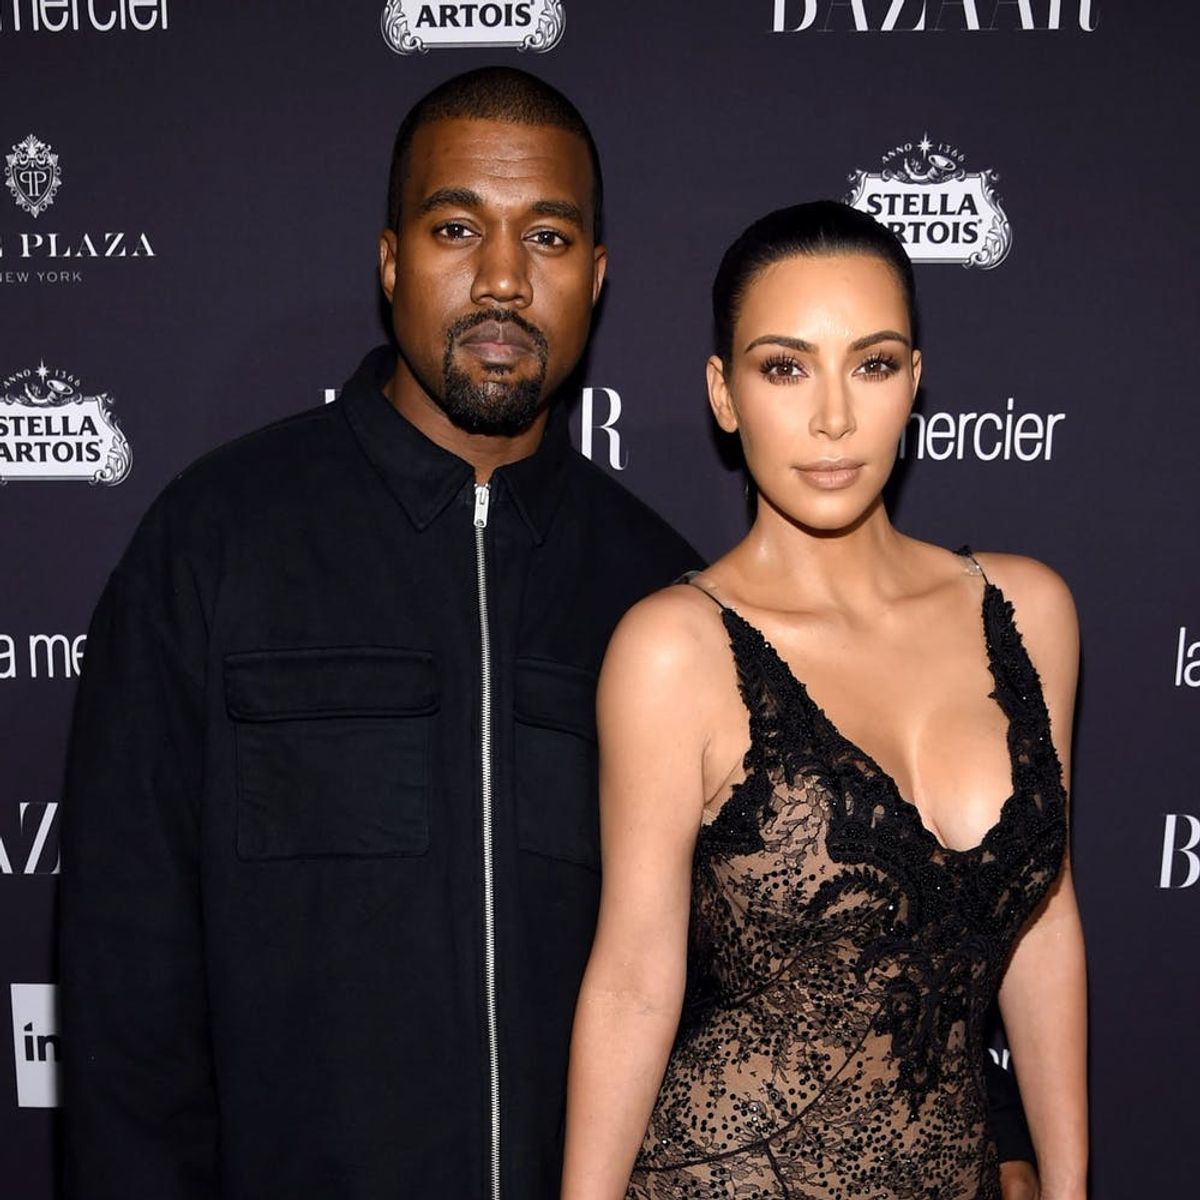 Kim Kardashian West and Kanye West Are Reportedly Expecting Their Third Child Via Surrogate